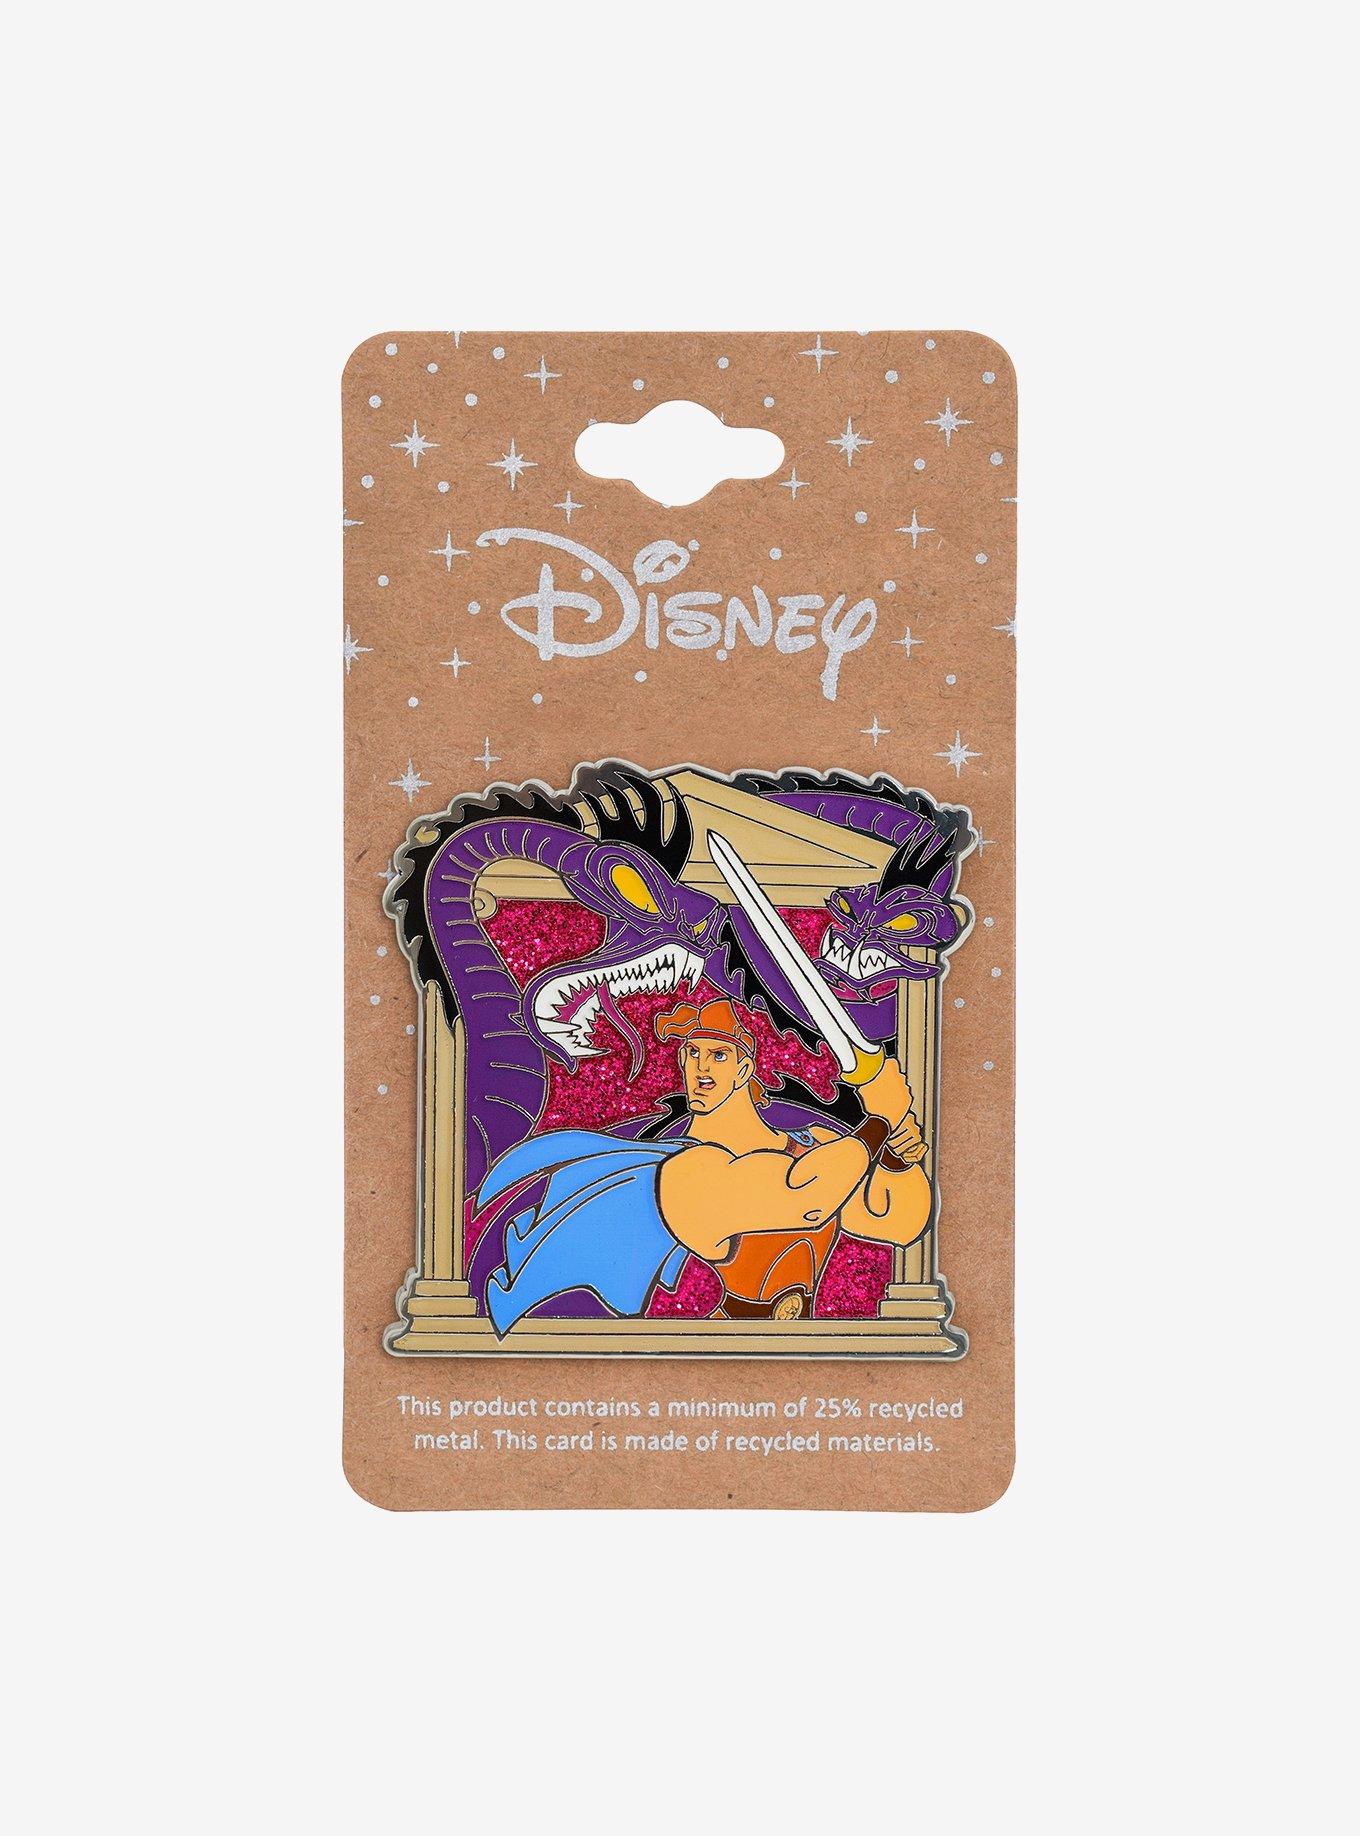 Disney Hercules Hydra Fight Glitter Filled Enamel Pin - BoxLunch Exclusive, , hi-res